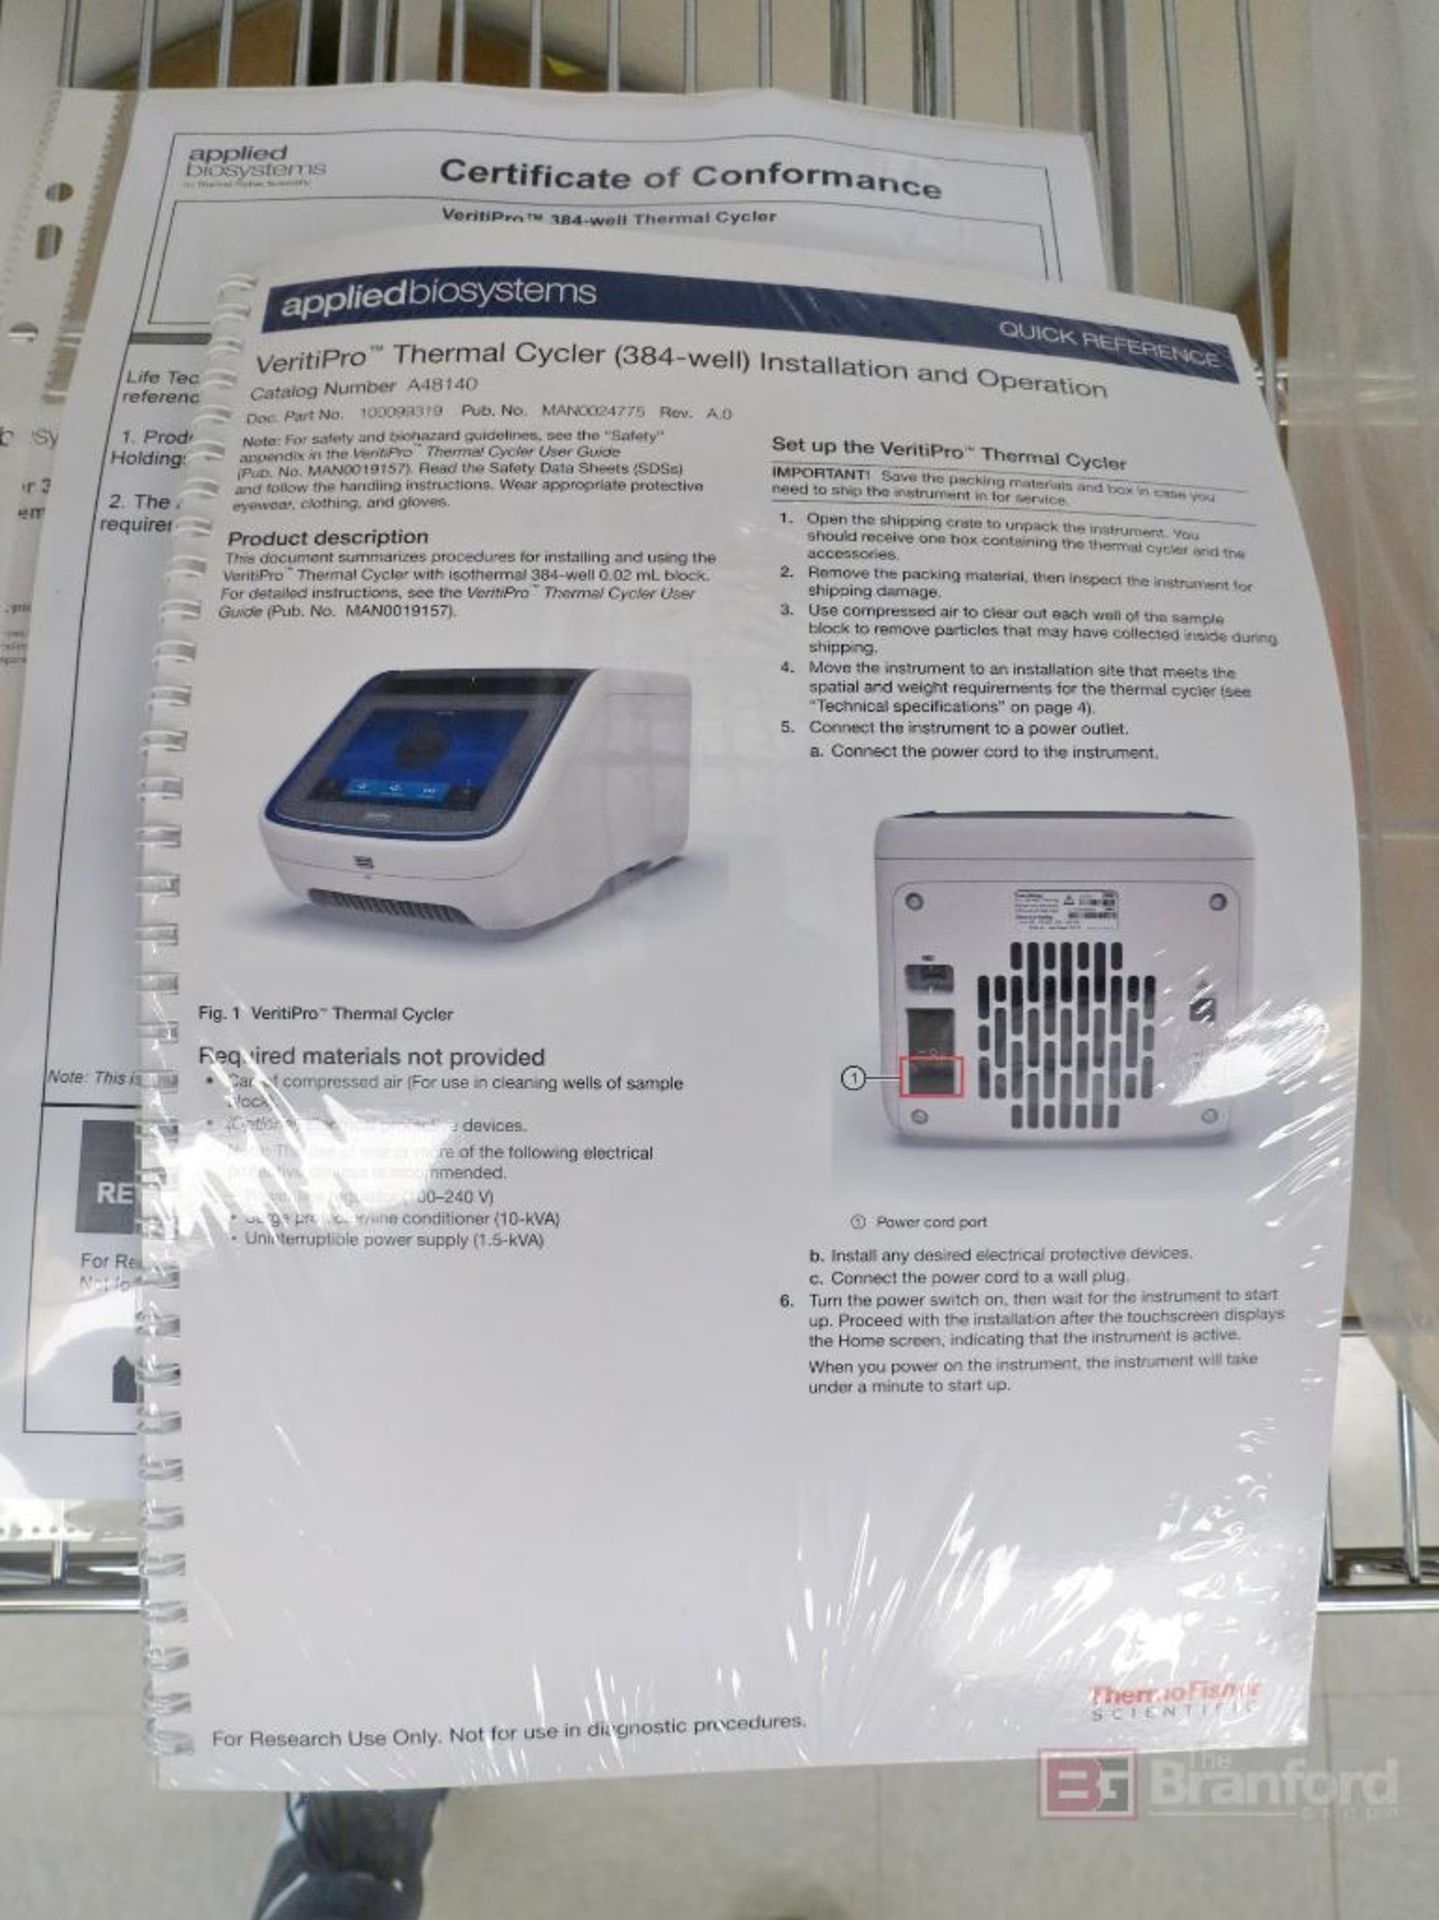 Thermo Applied Biosystems VeritiPro 384-Well Thermal Cycler - Image 2 of 3